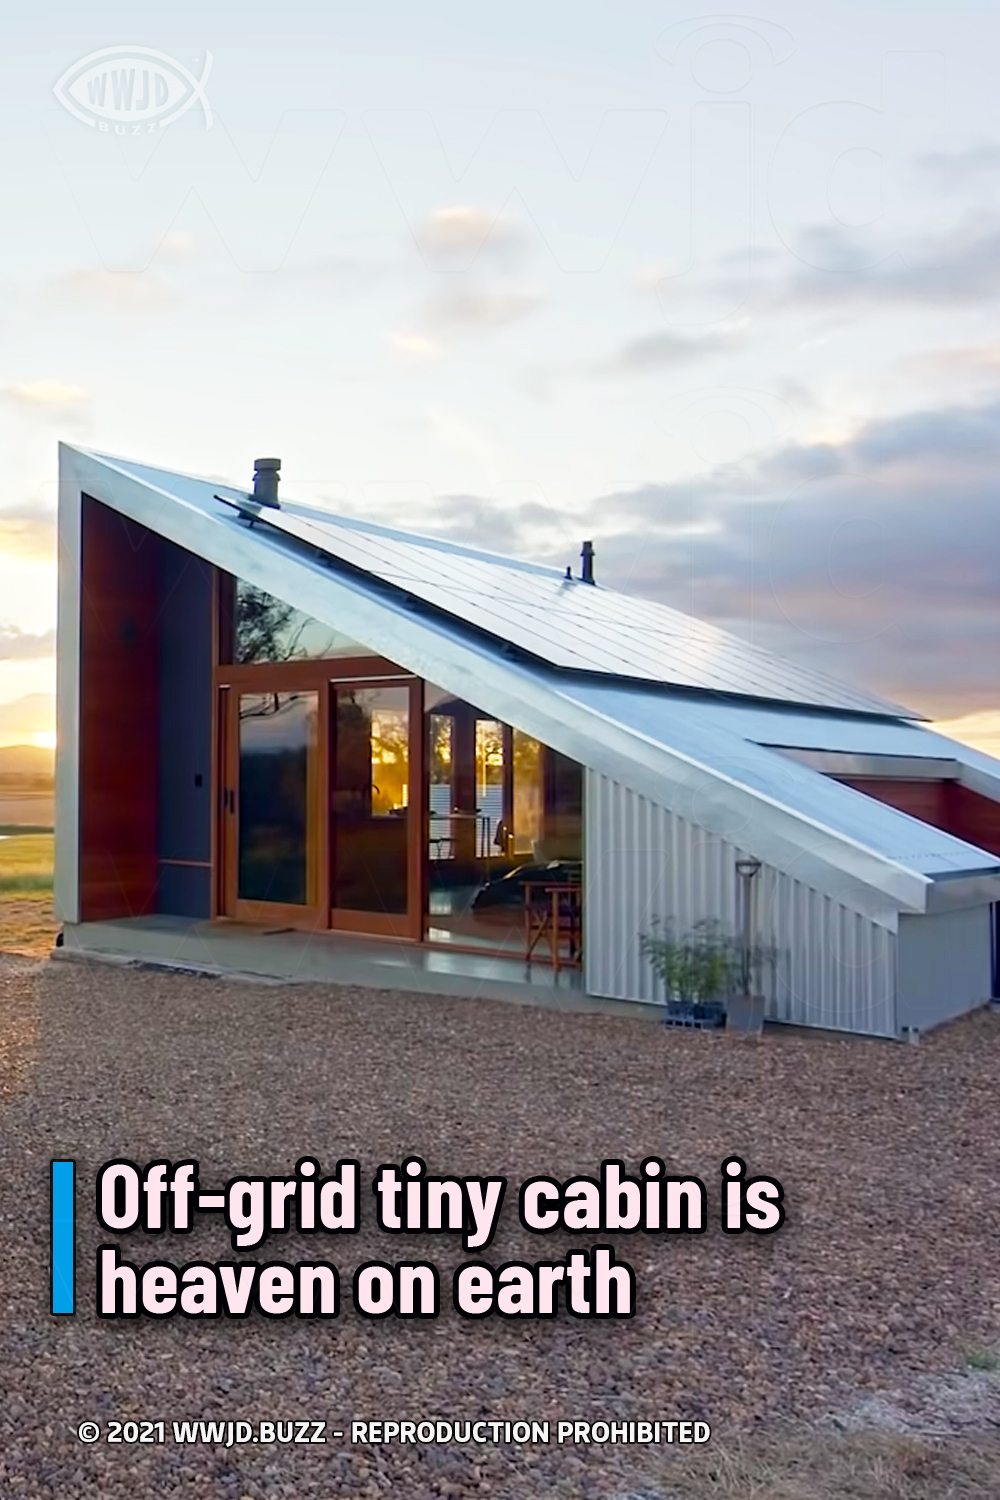 Off-grid tiny cabin is heaven on earth